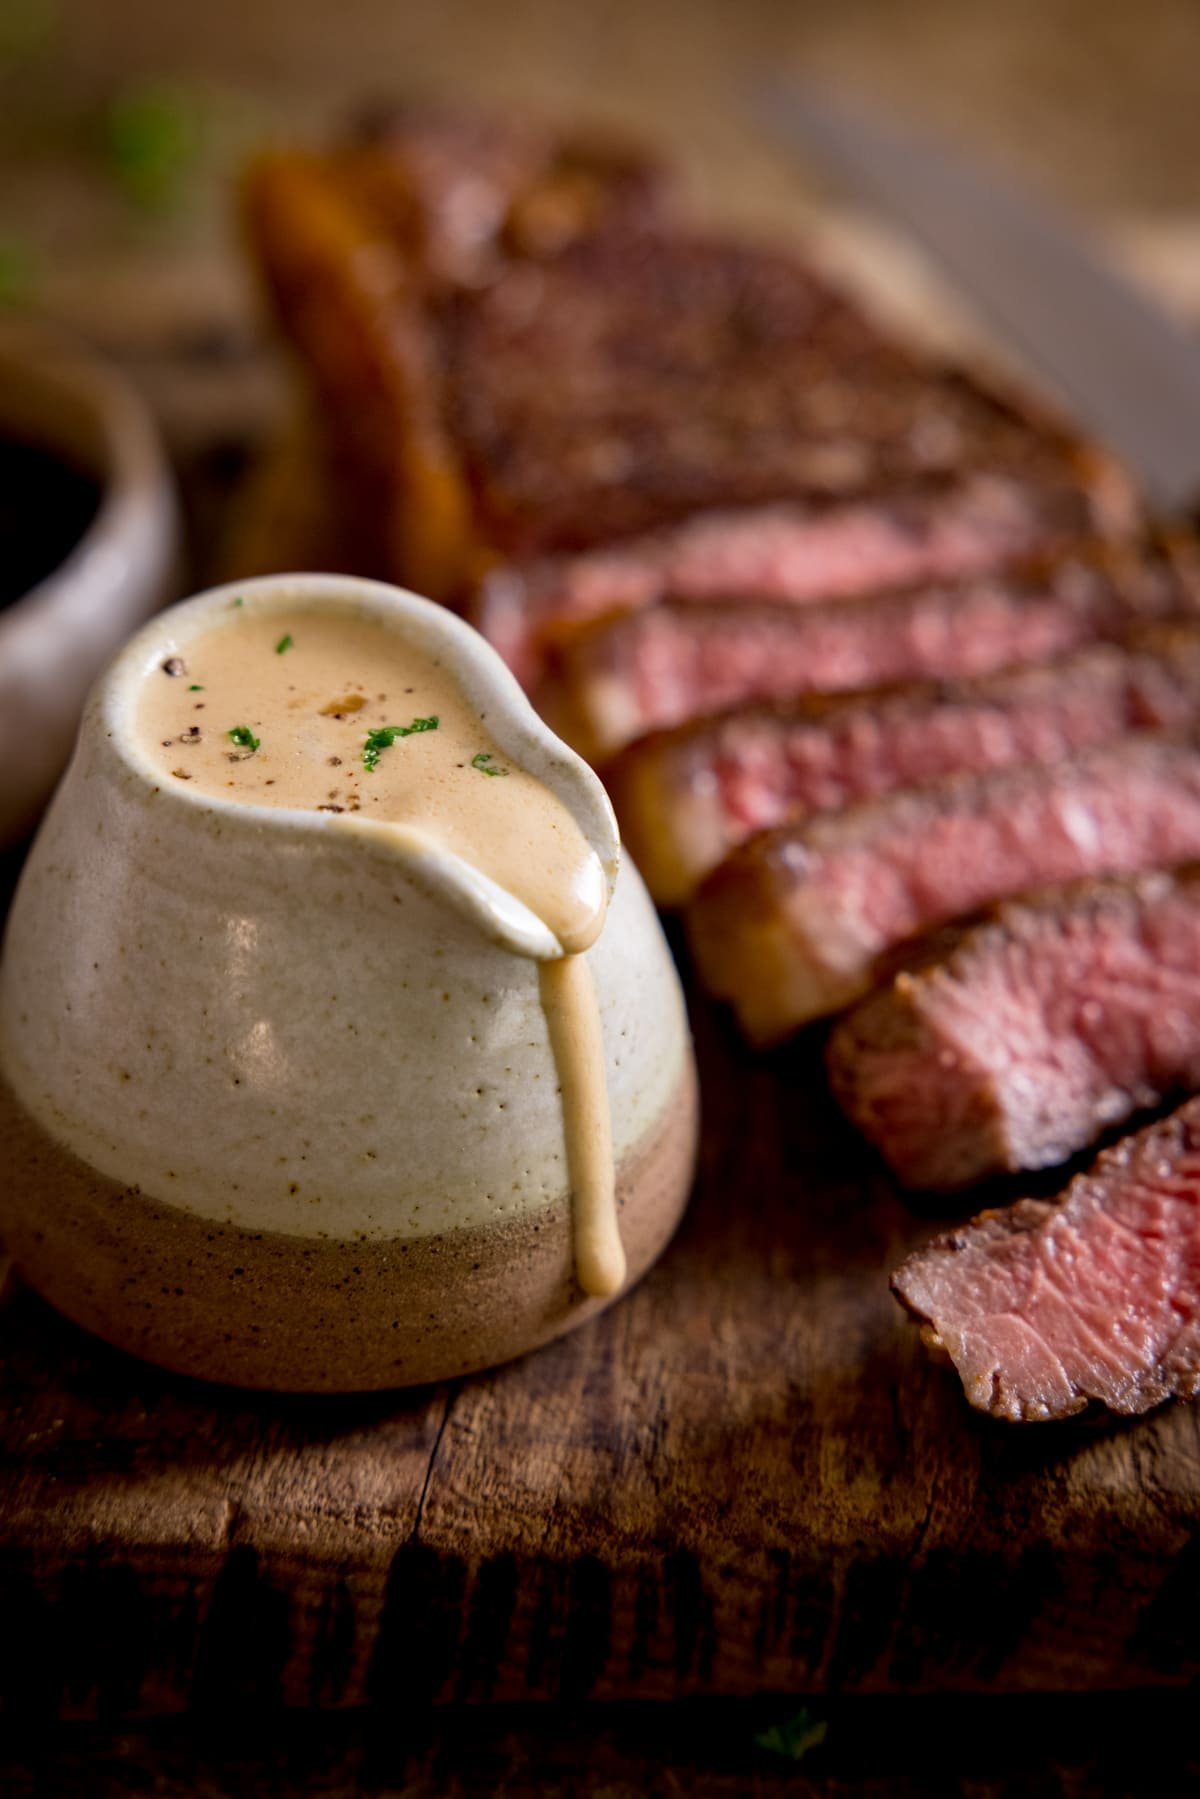 A jug of diane sauce sat next to a sliced cooked steak on a wooden board